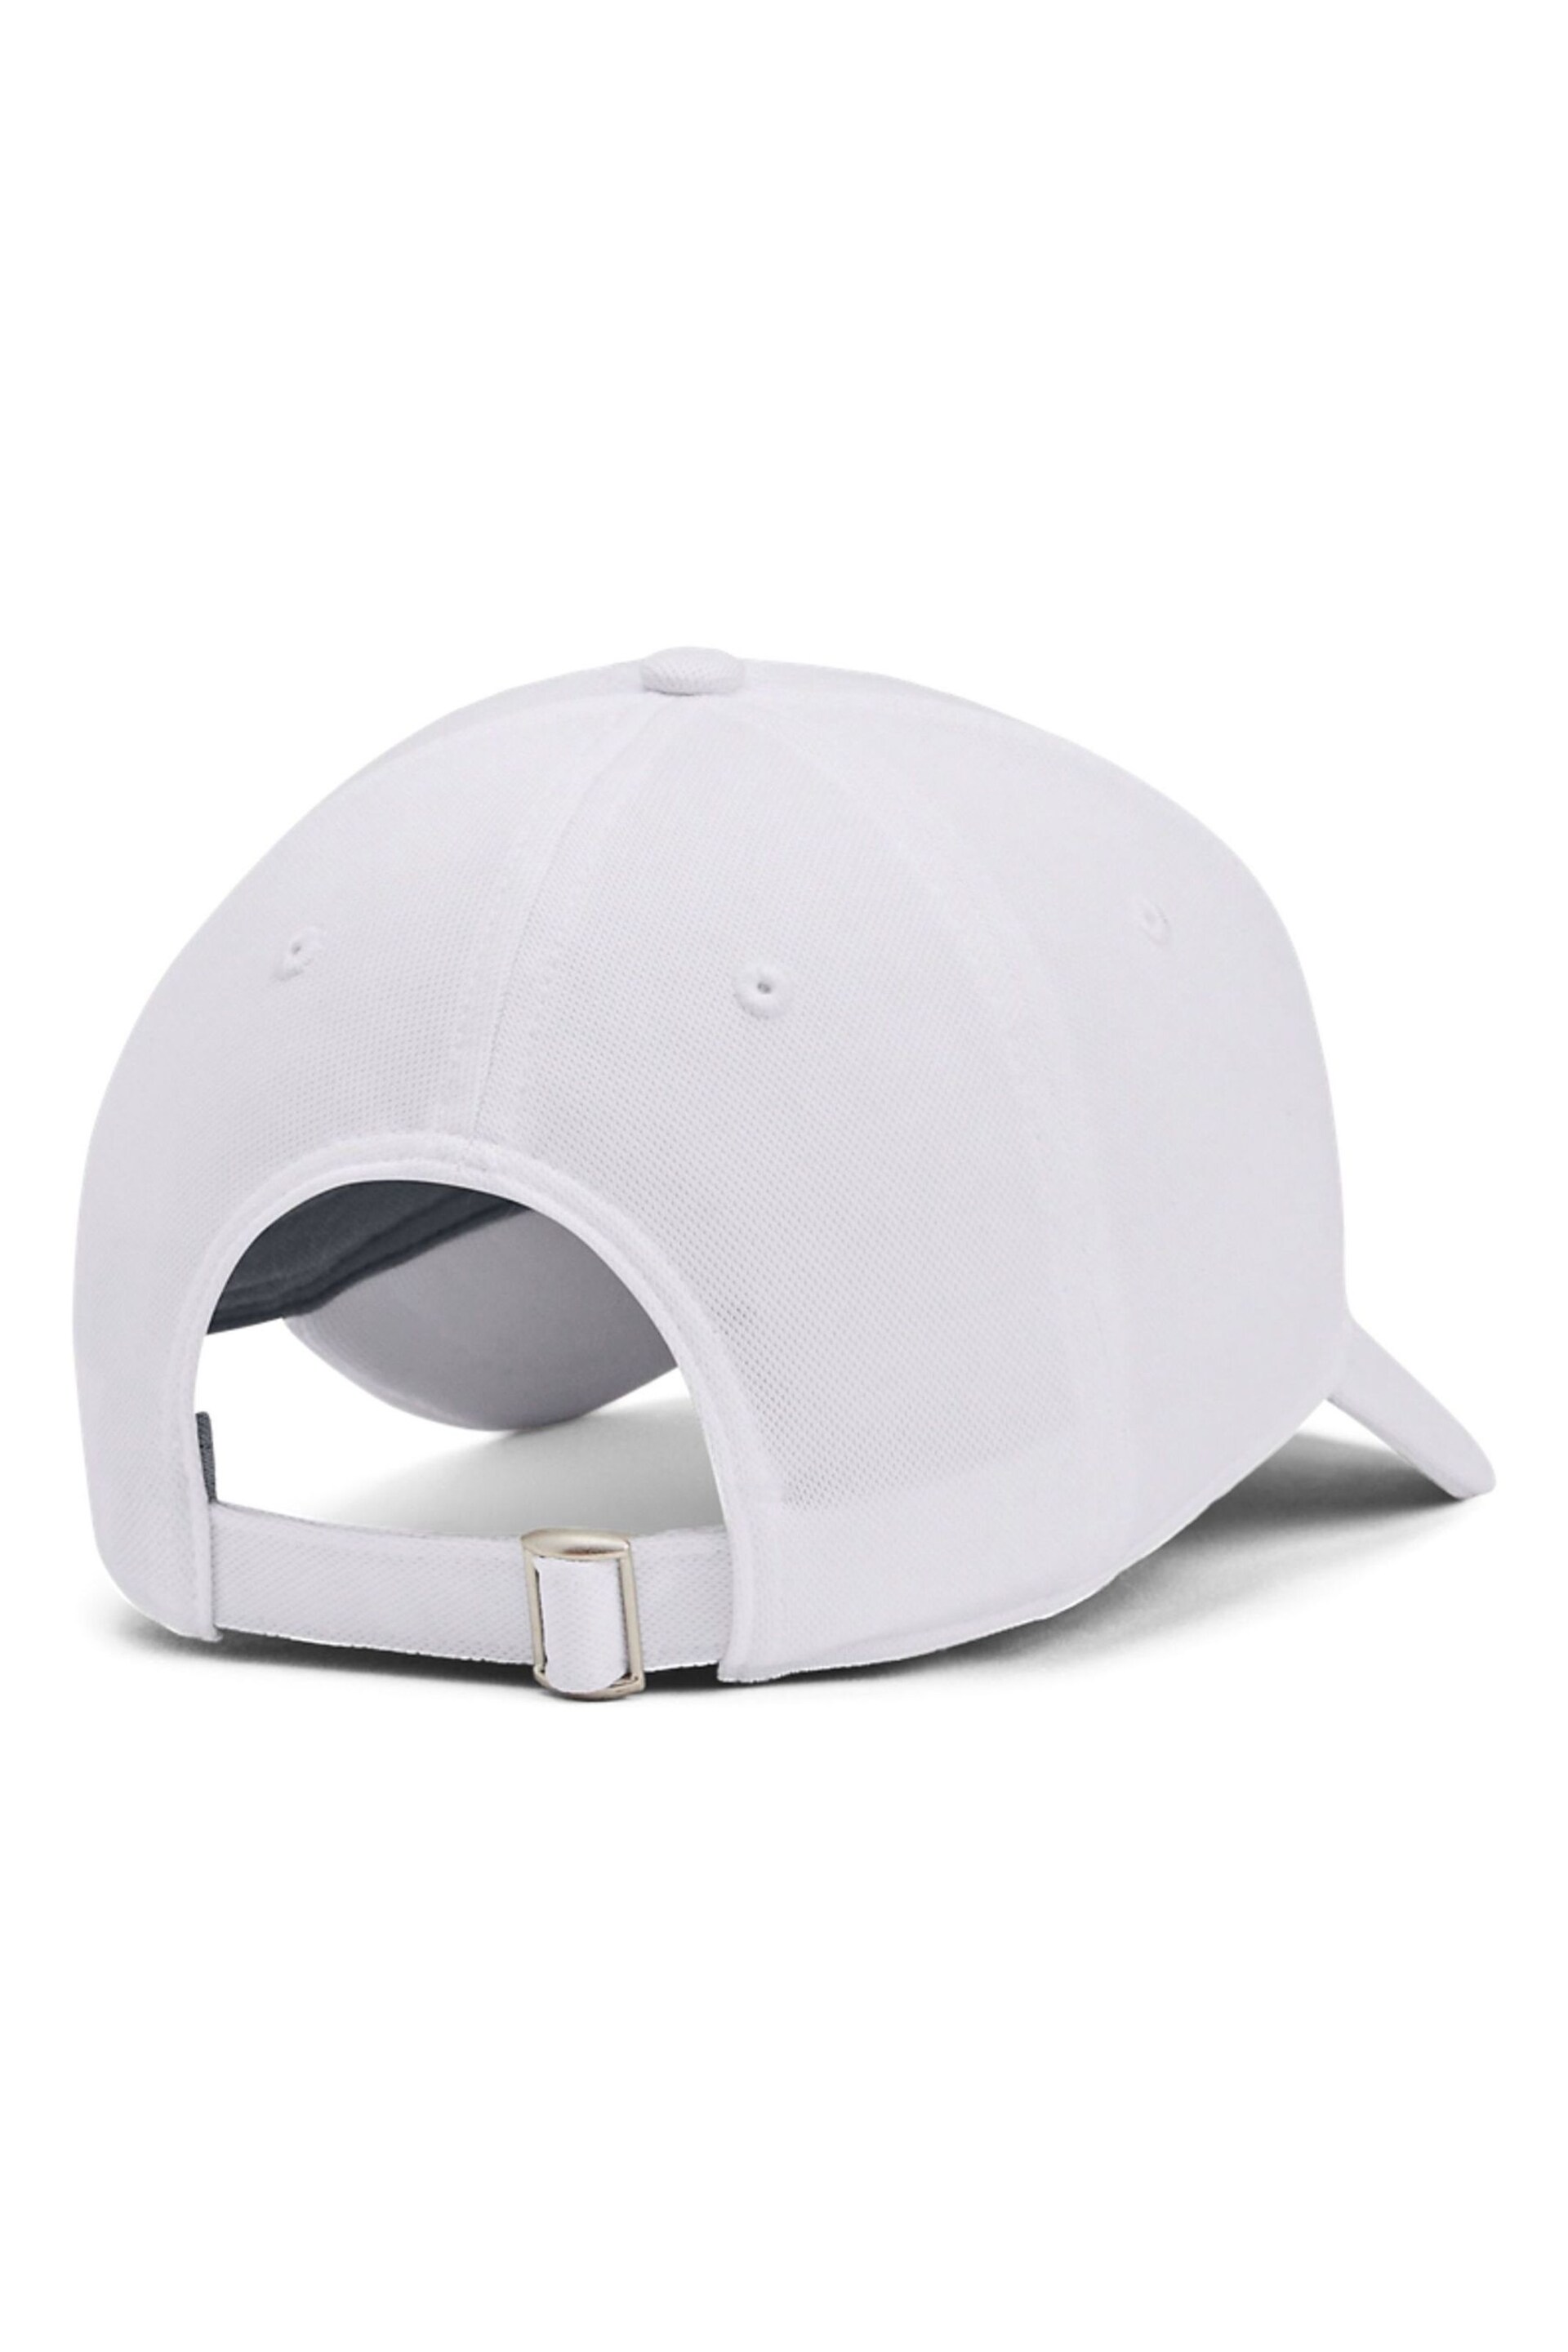 Under Armour White Blitzing Adjustable Cap - Image 2 of 3